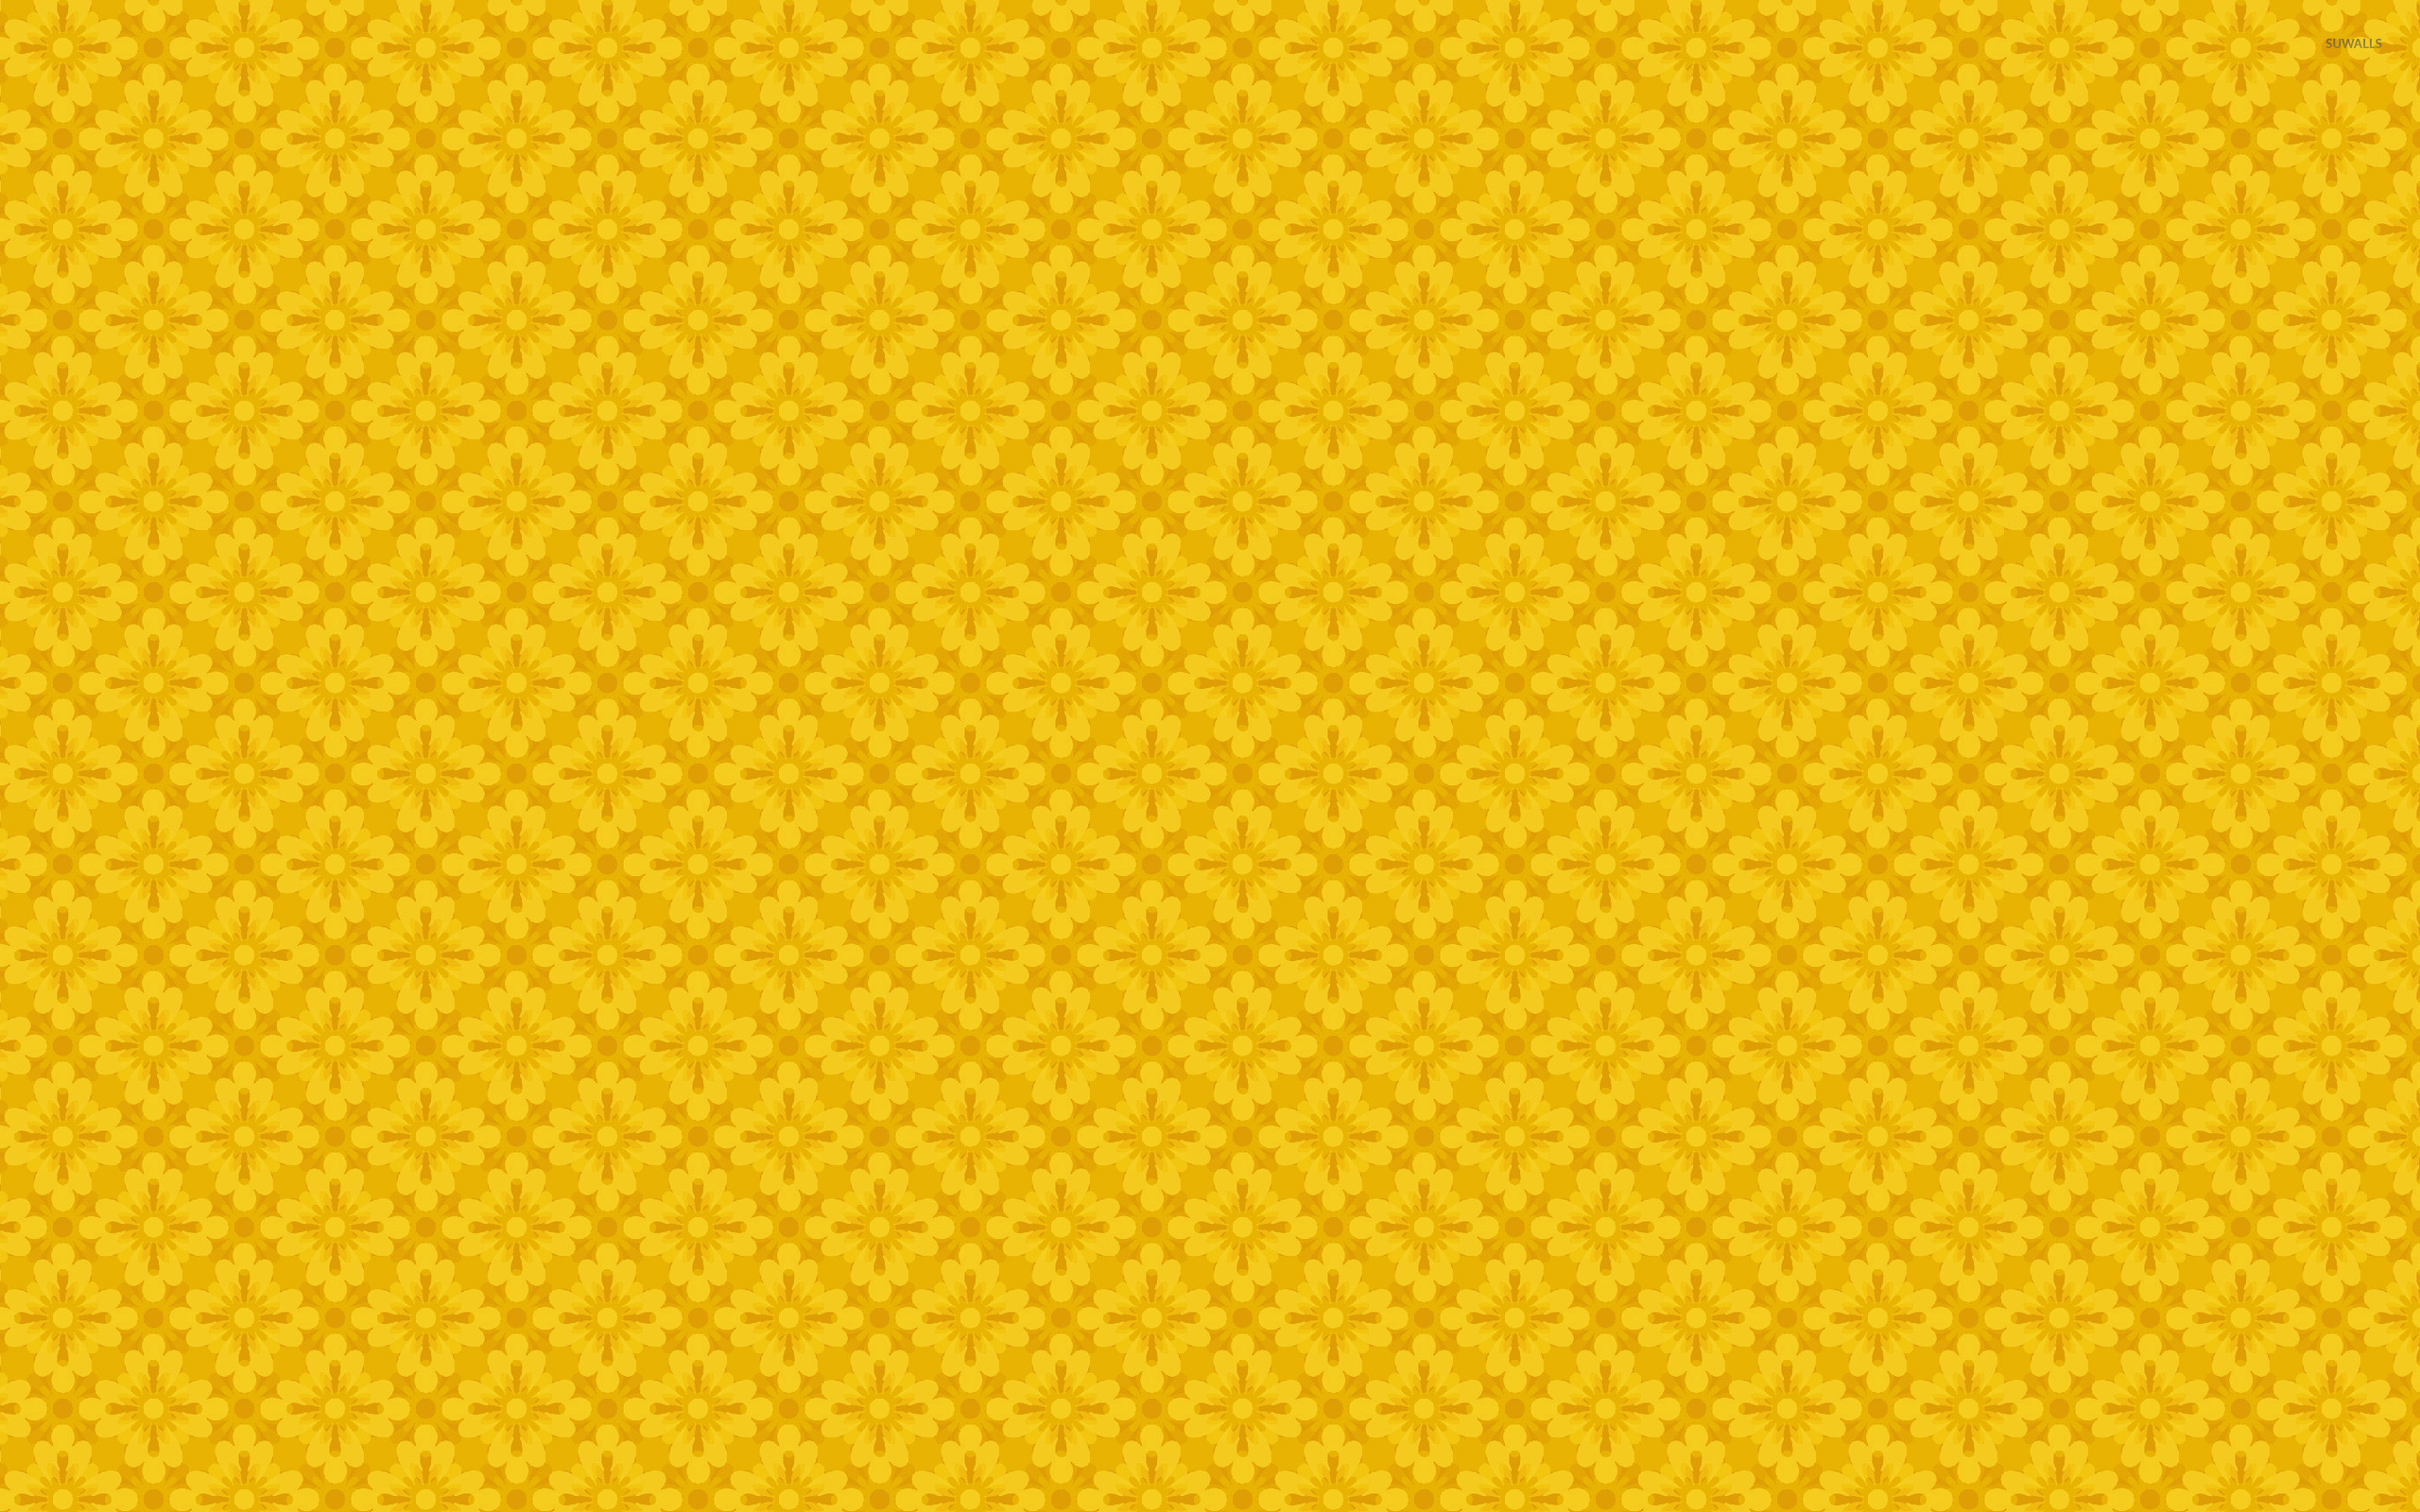 Yellow Patterned Wallpaper Grasscloth